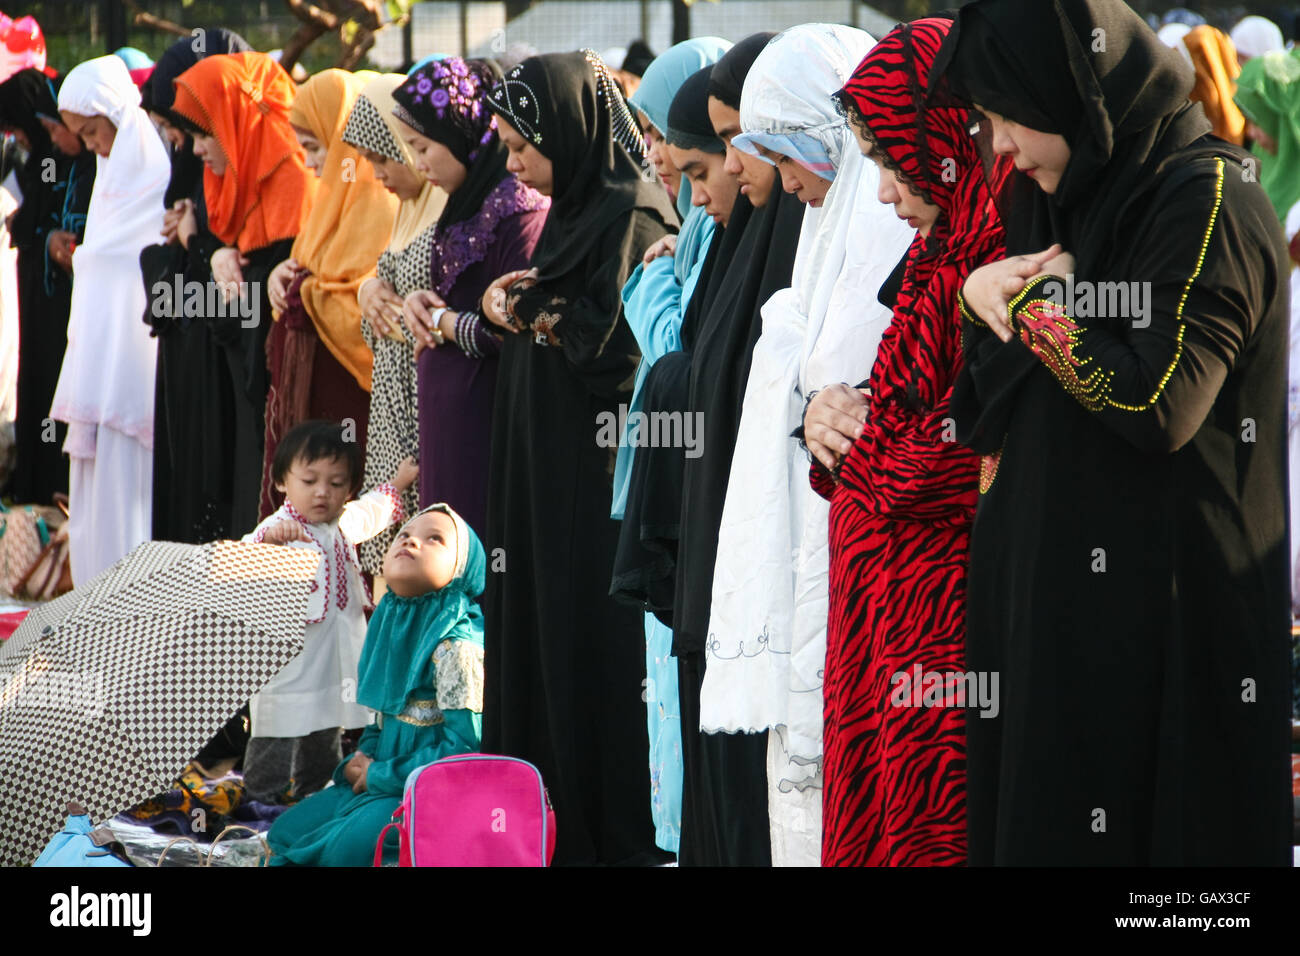 Philippines. 6th July, 2016. A young girl looks on while Muslim adults pray at the Quirino Grandstand. Filipino Muslims from nearby cities converged at the Quirino Grandstand in Manila to celebrate the end of Ramadan. Eid al-Fitr marks the end of the holy month of fasting in Islam. © J Gerard Seguia/ZUMA Wire/Alamy Live News Stock Photo